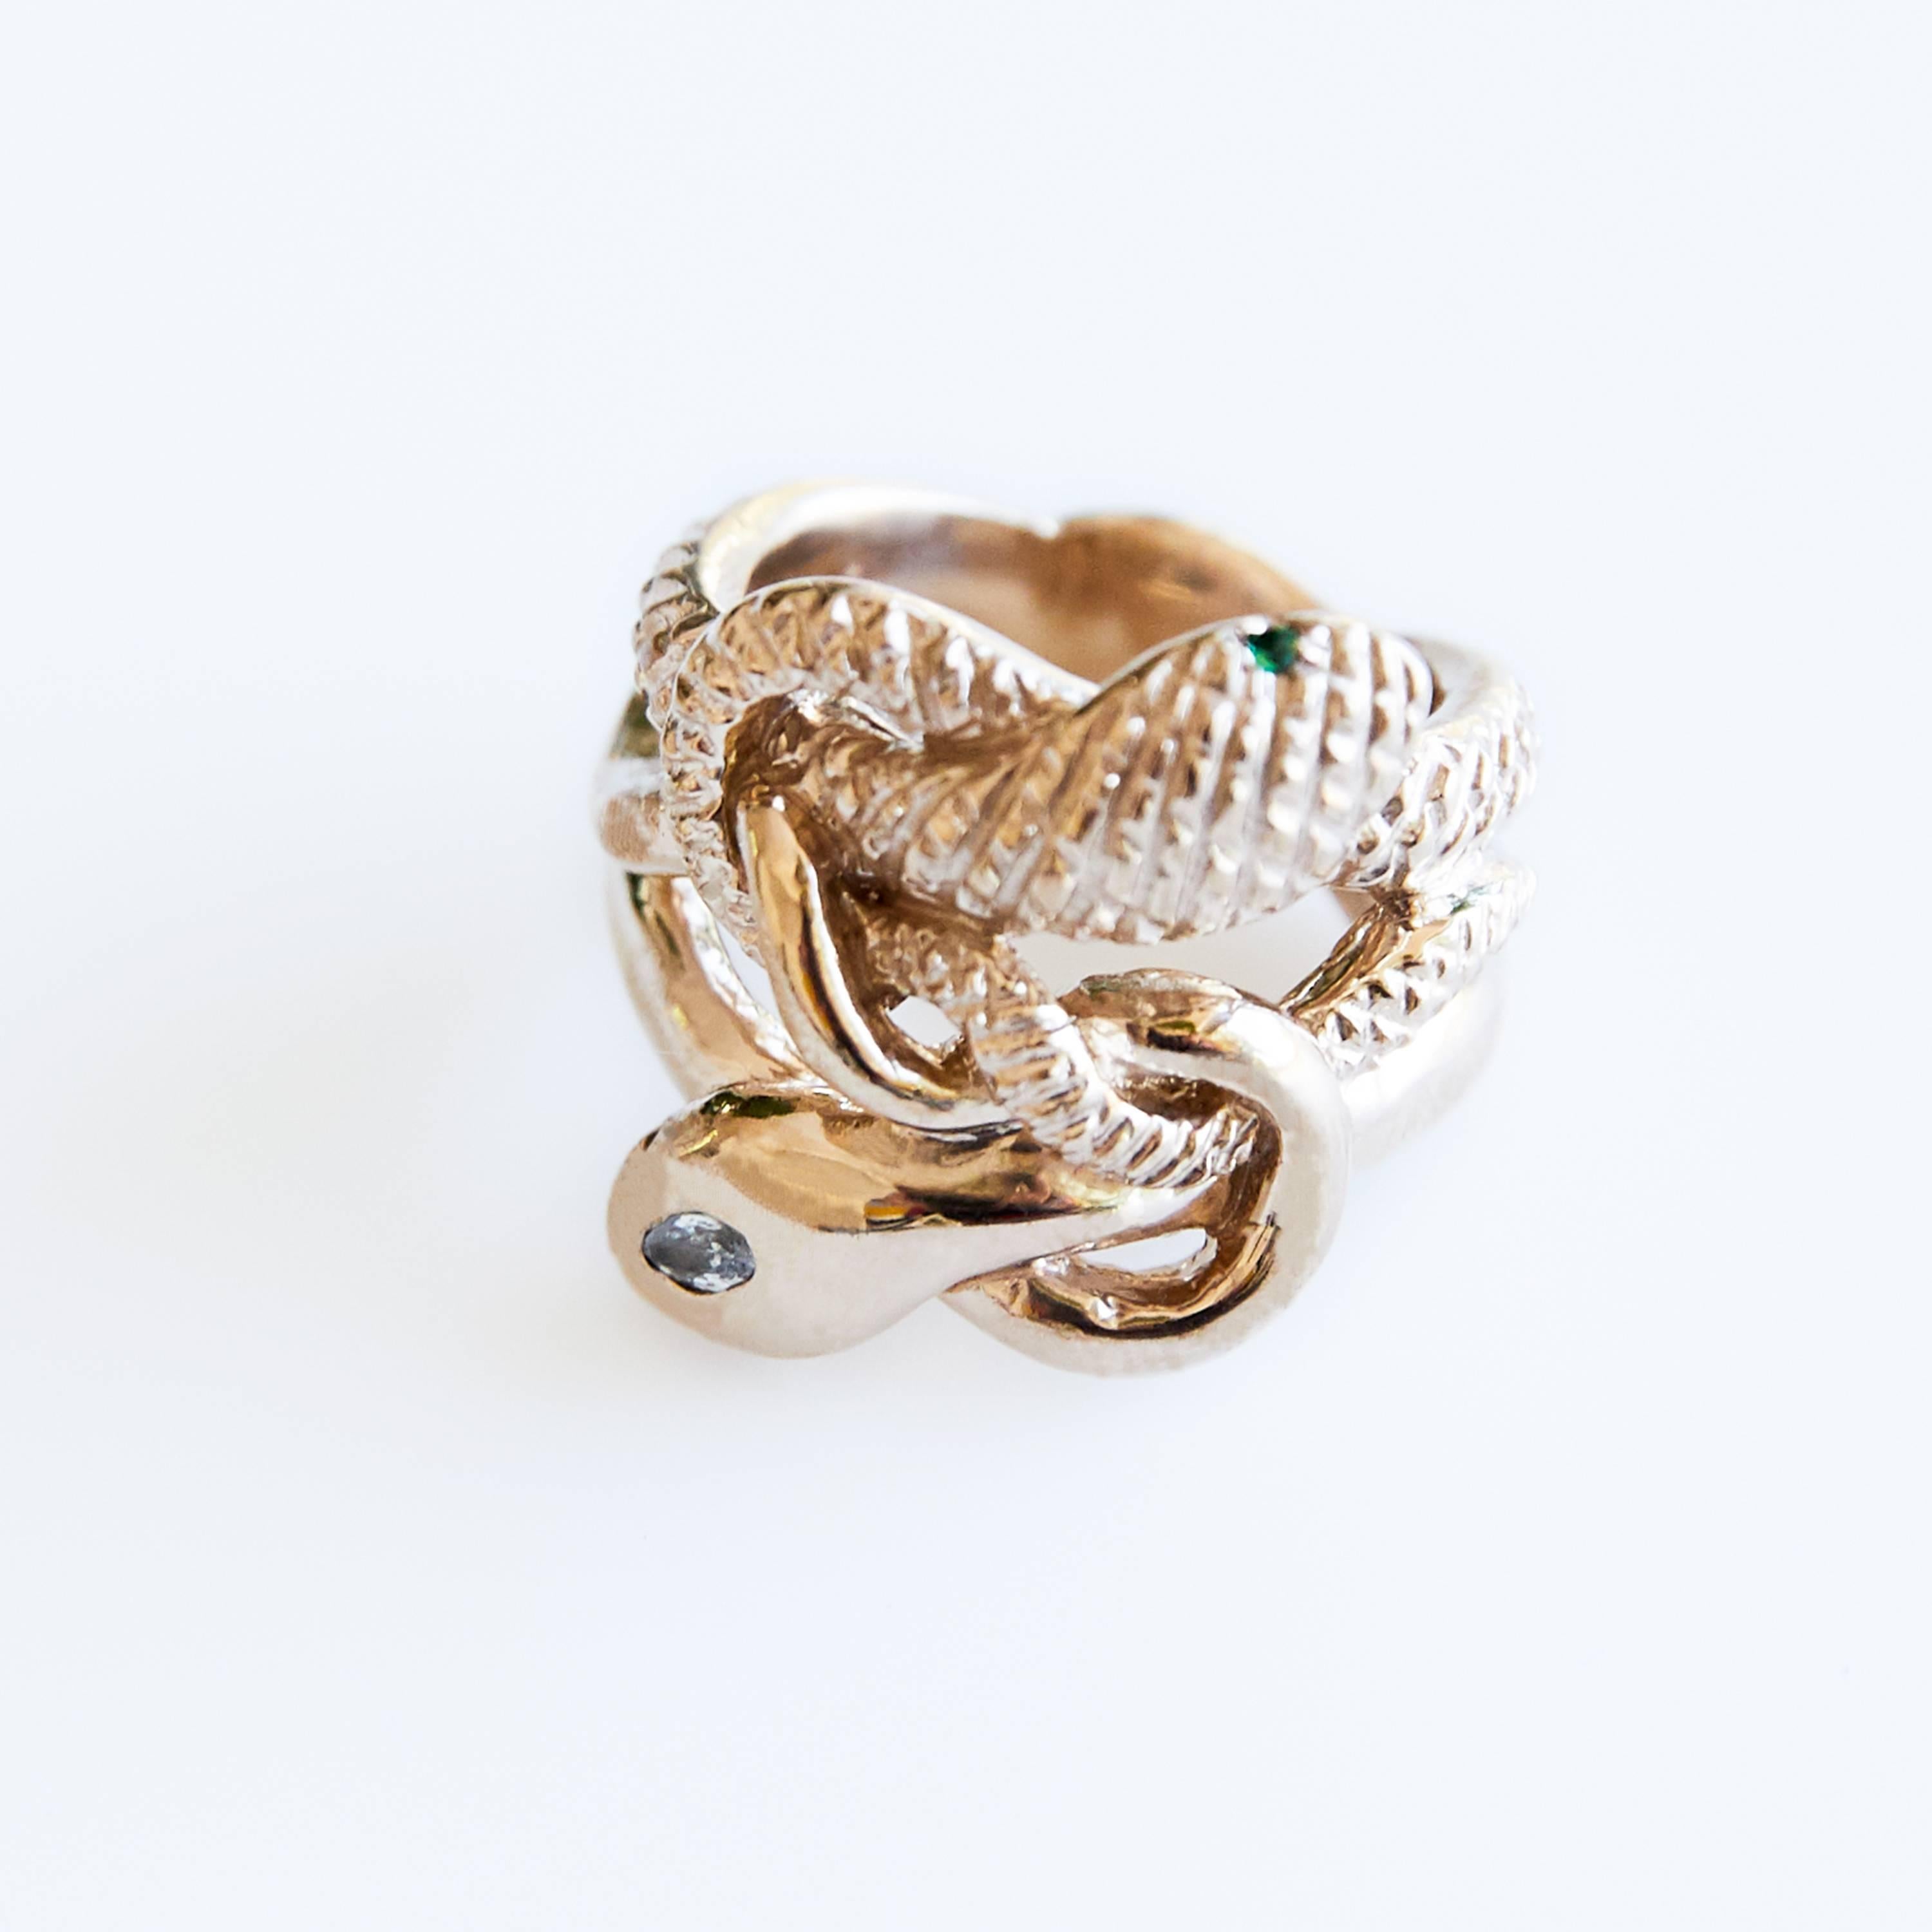 Brilliant Cut White Diamond Emerald Snake Ring Gold Vermeil Cocktail Ring J Dauphin For Sale